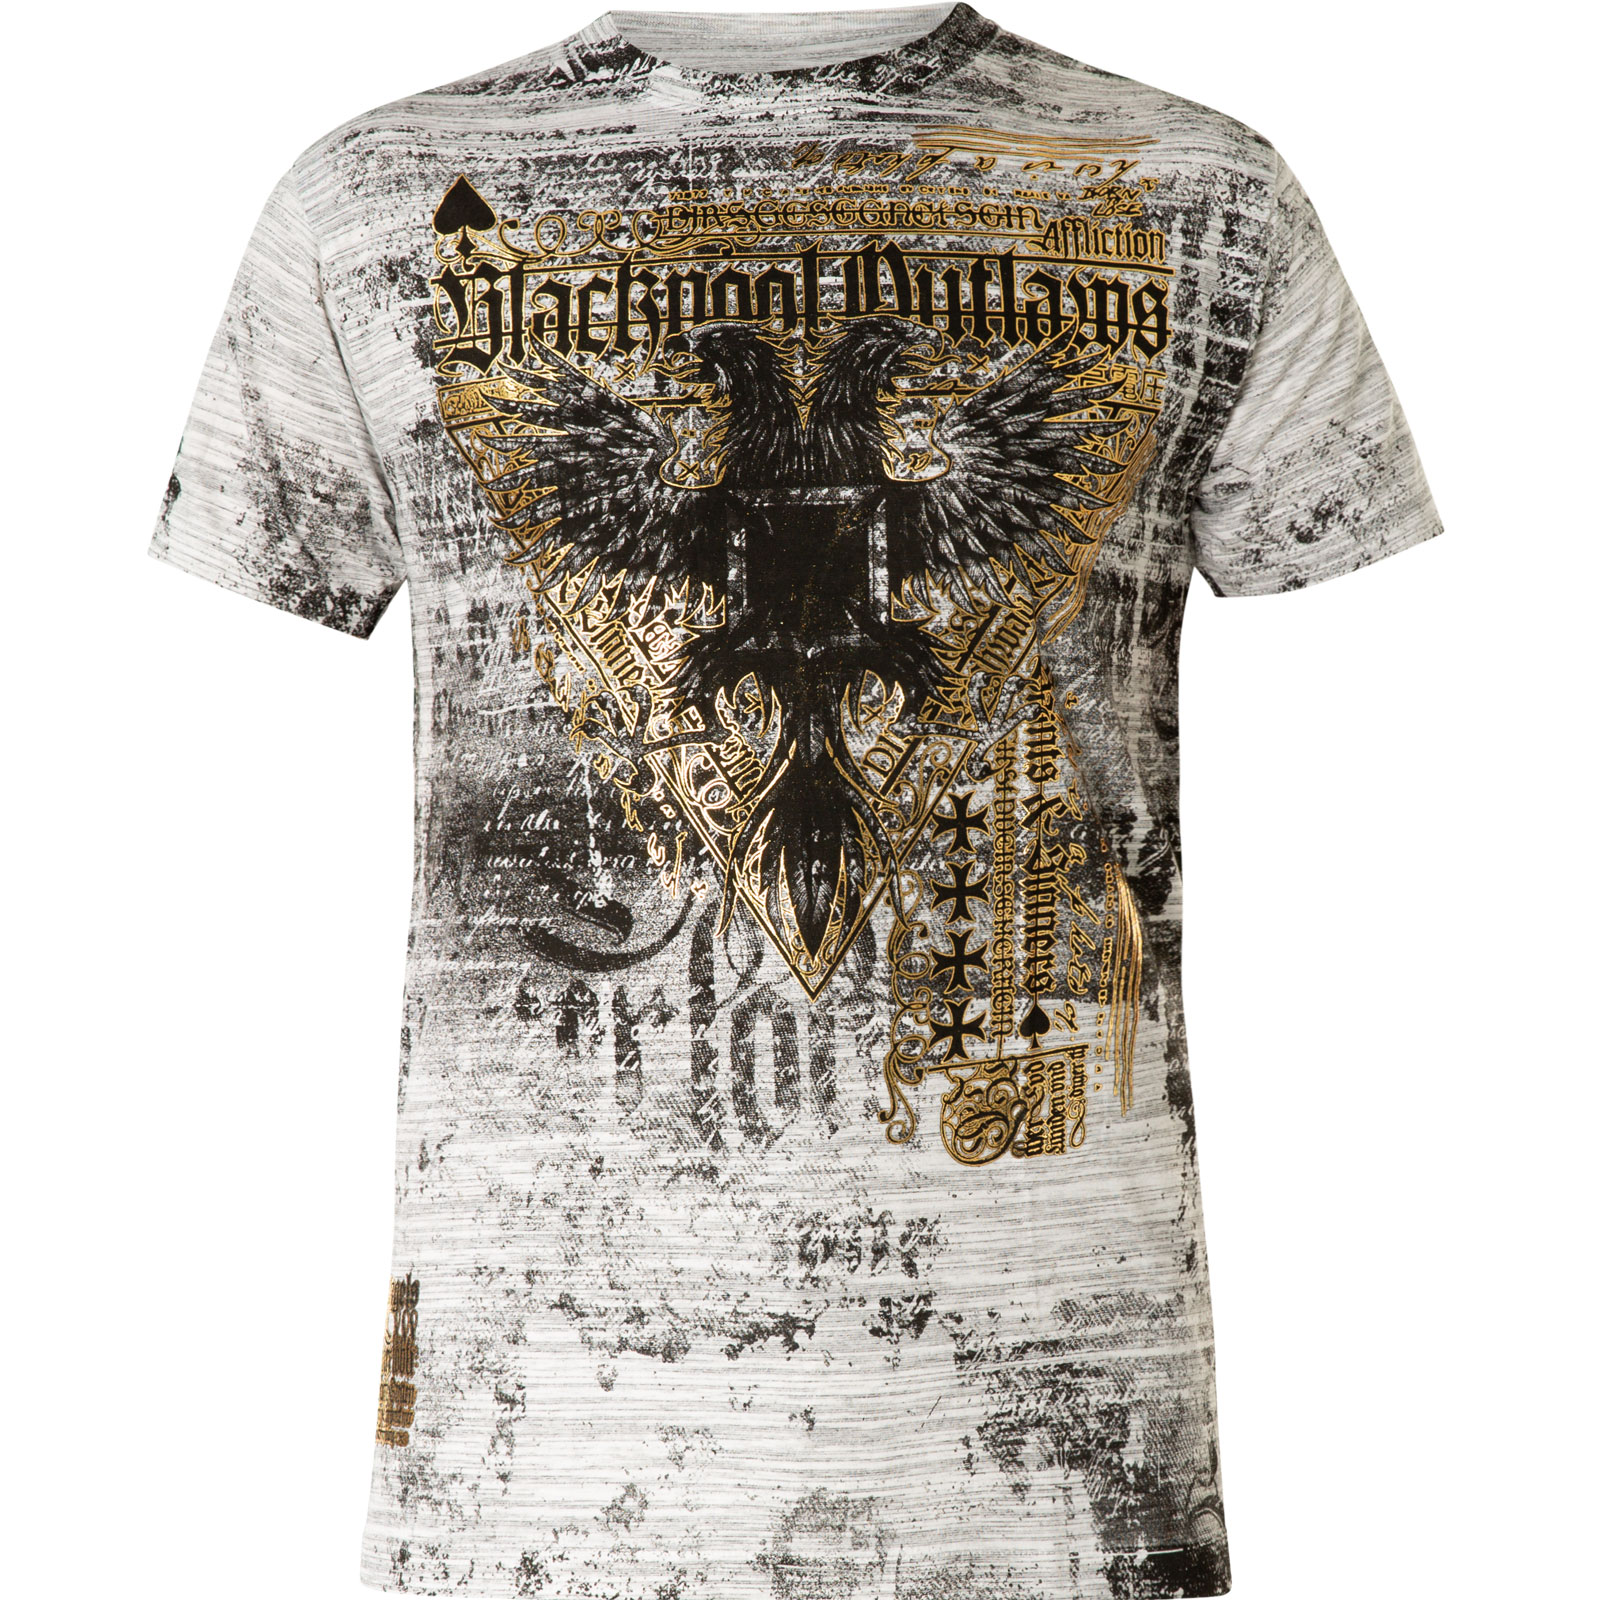 Affliction T-Shirt Dark Times Print with two-headed bird